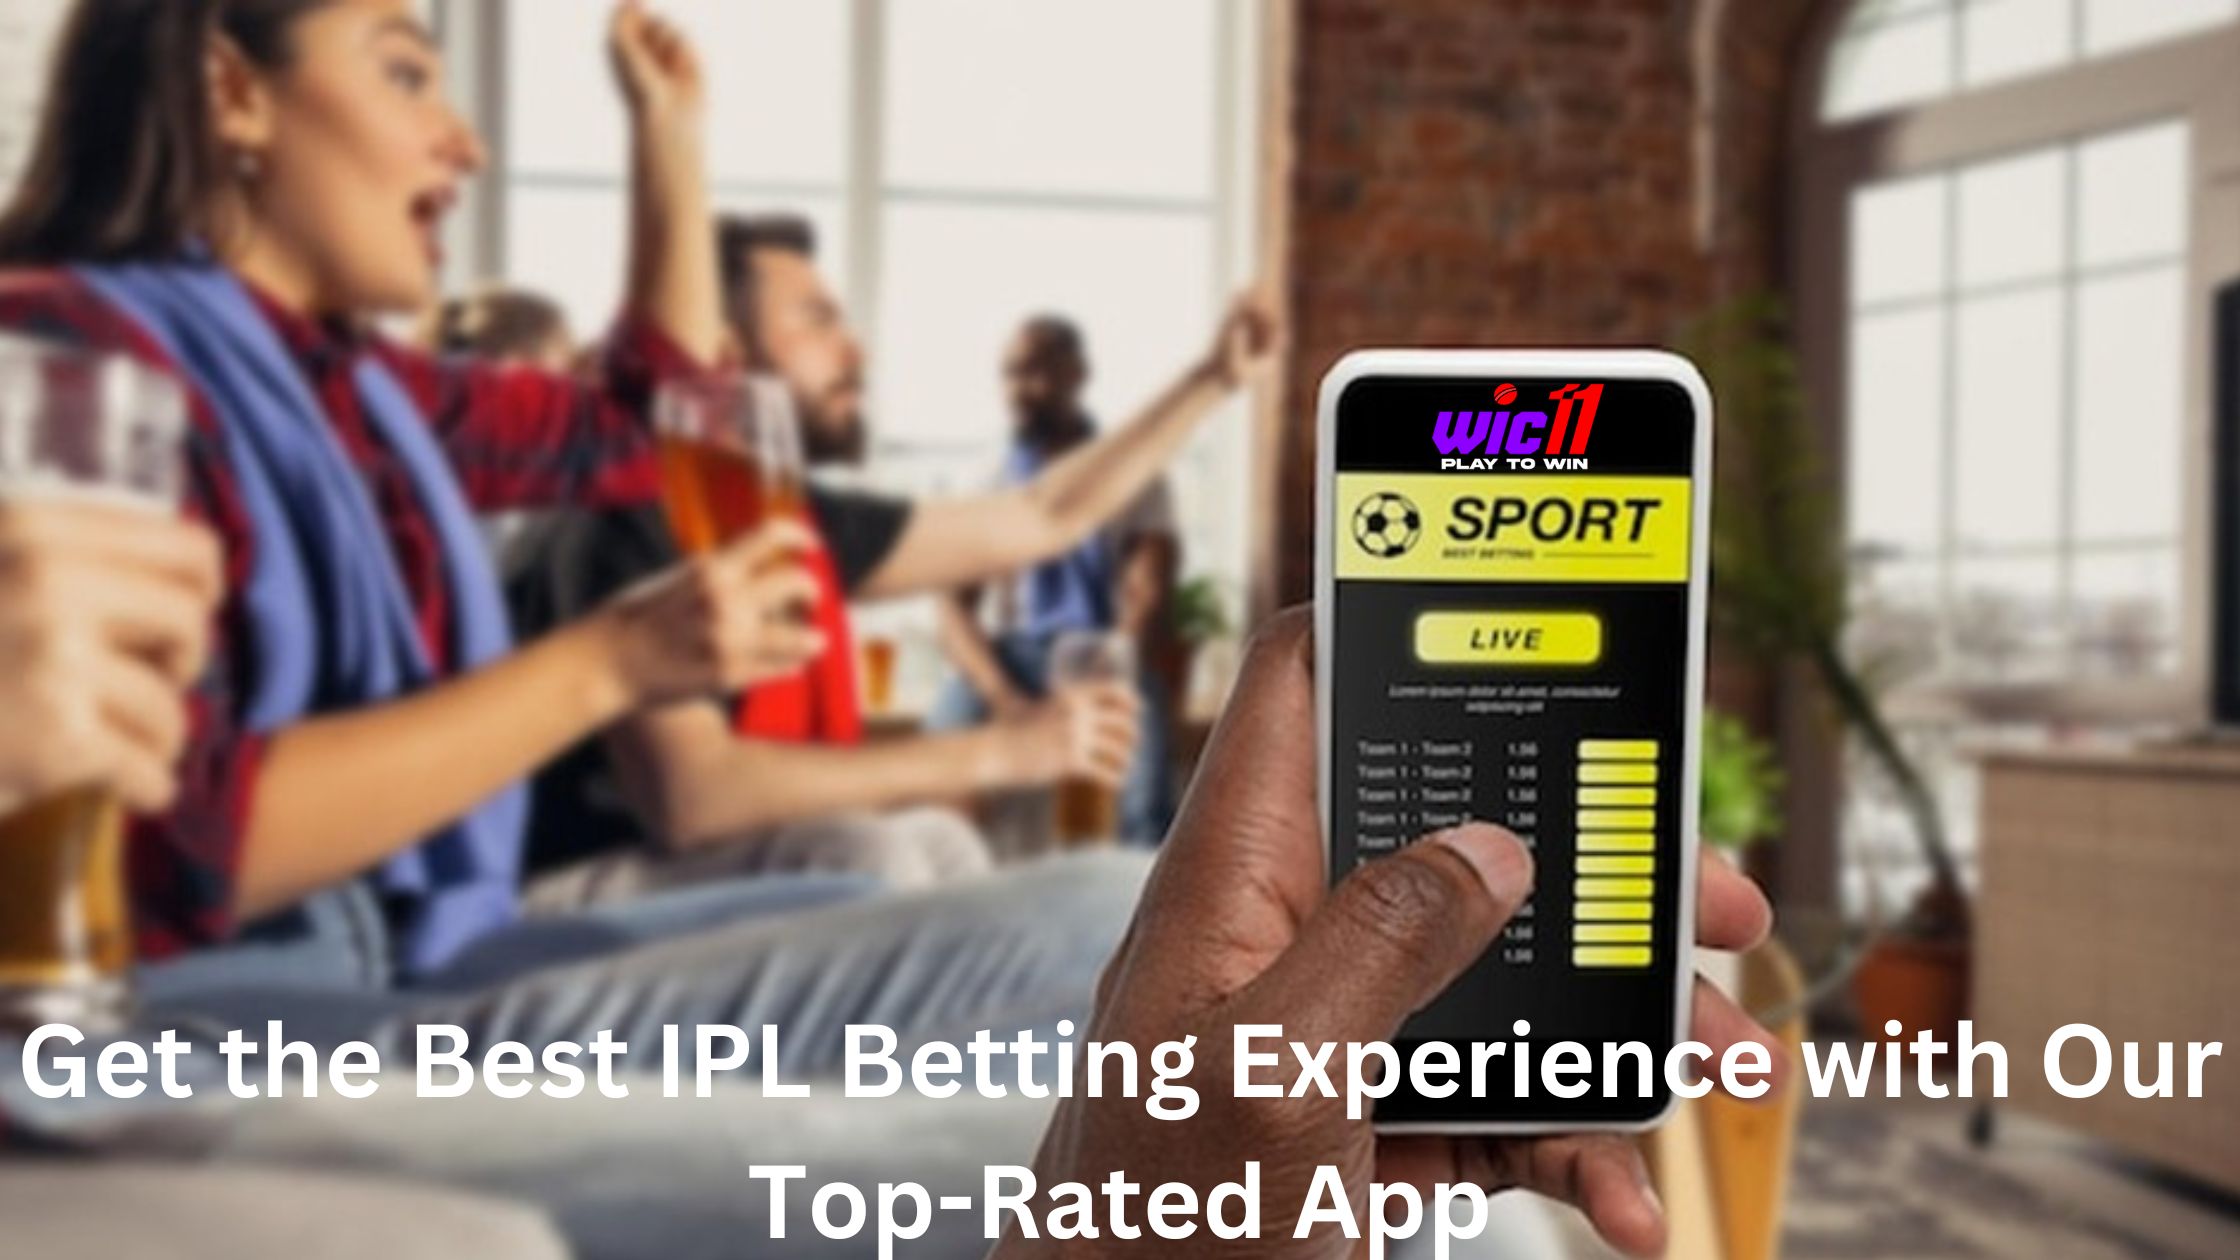 Get the Best IPL Betting Experience with Our Top-Rated App